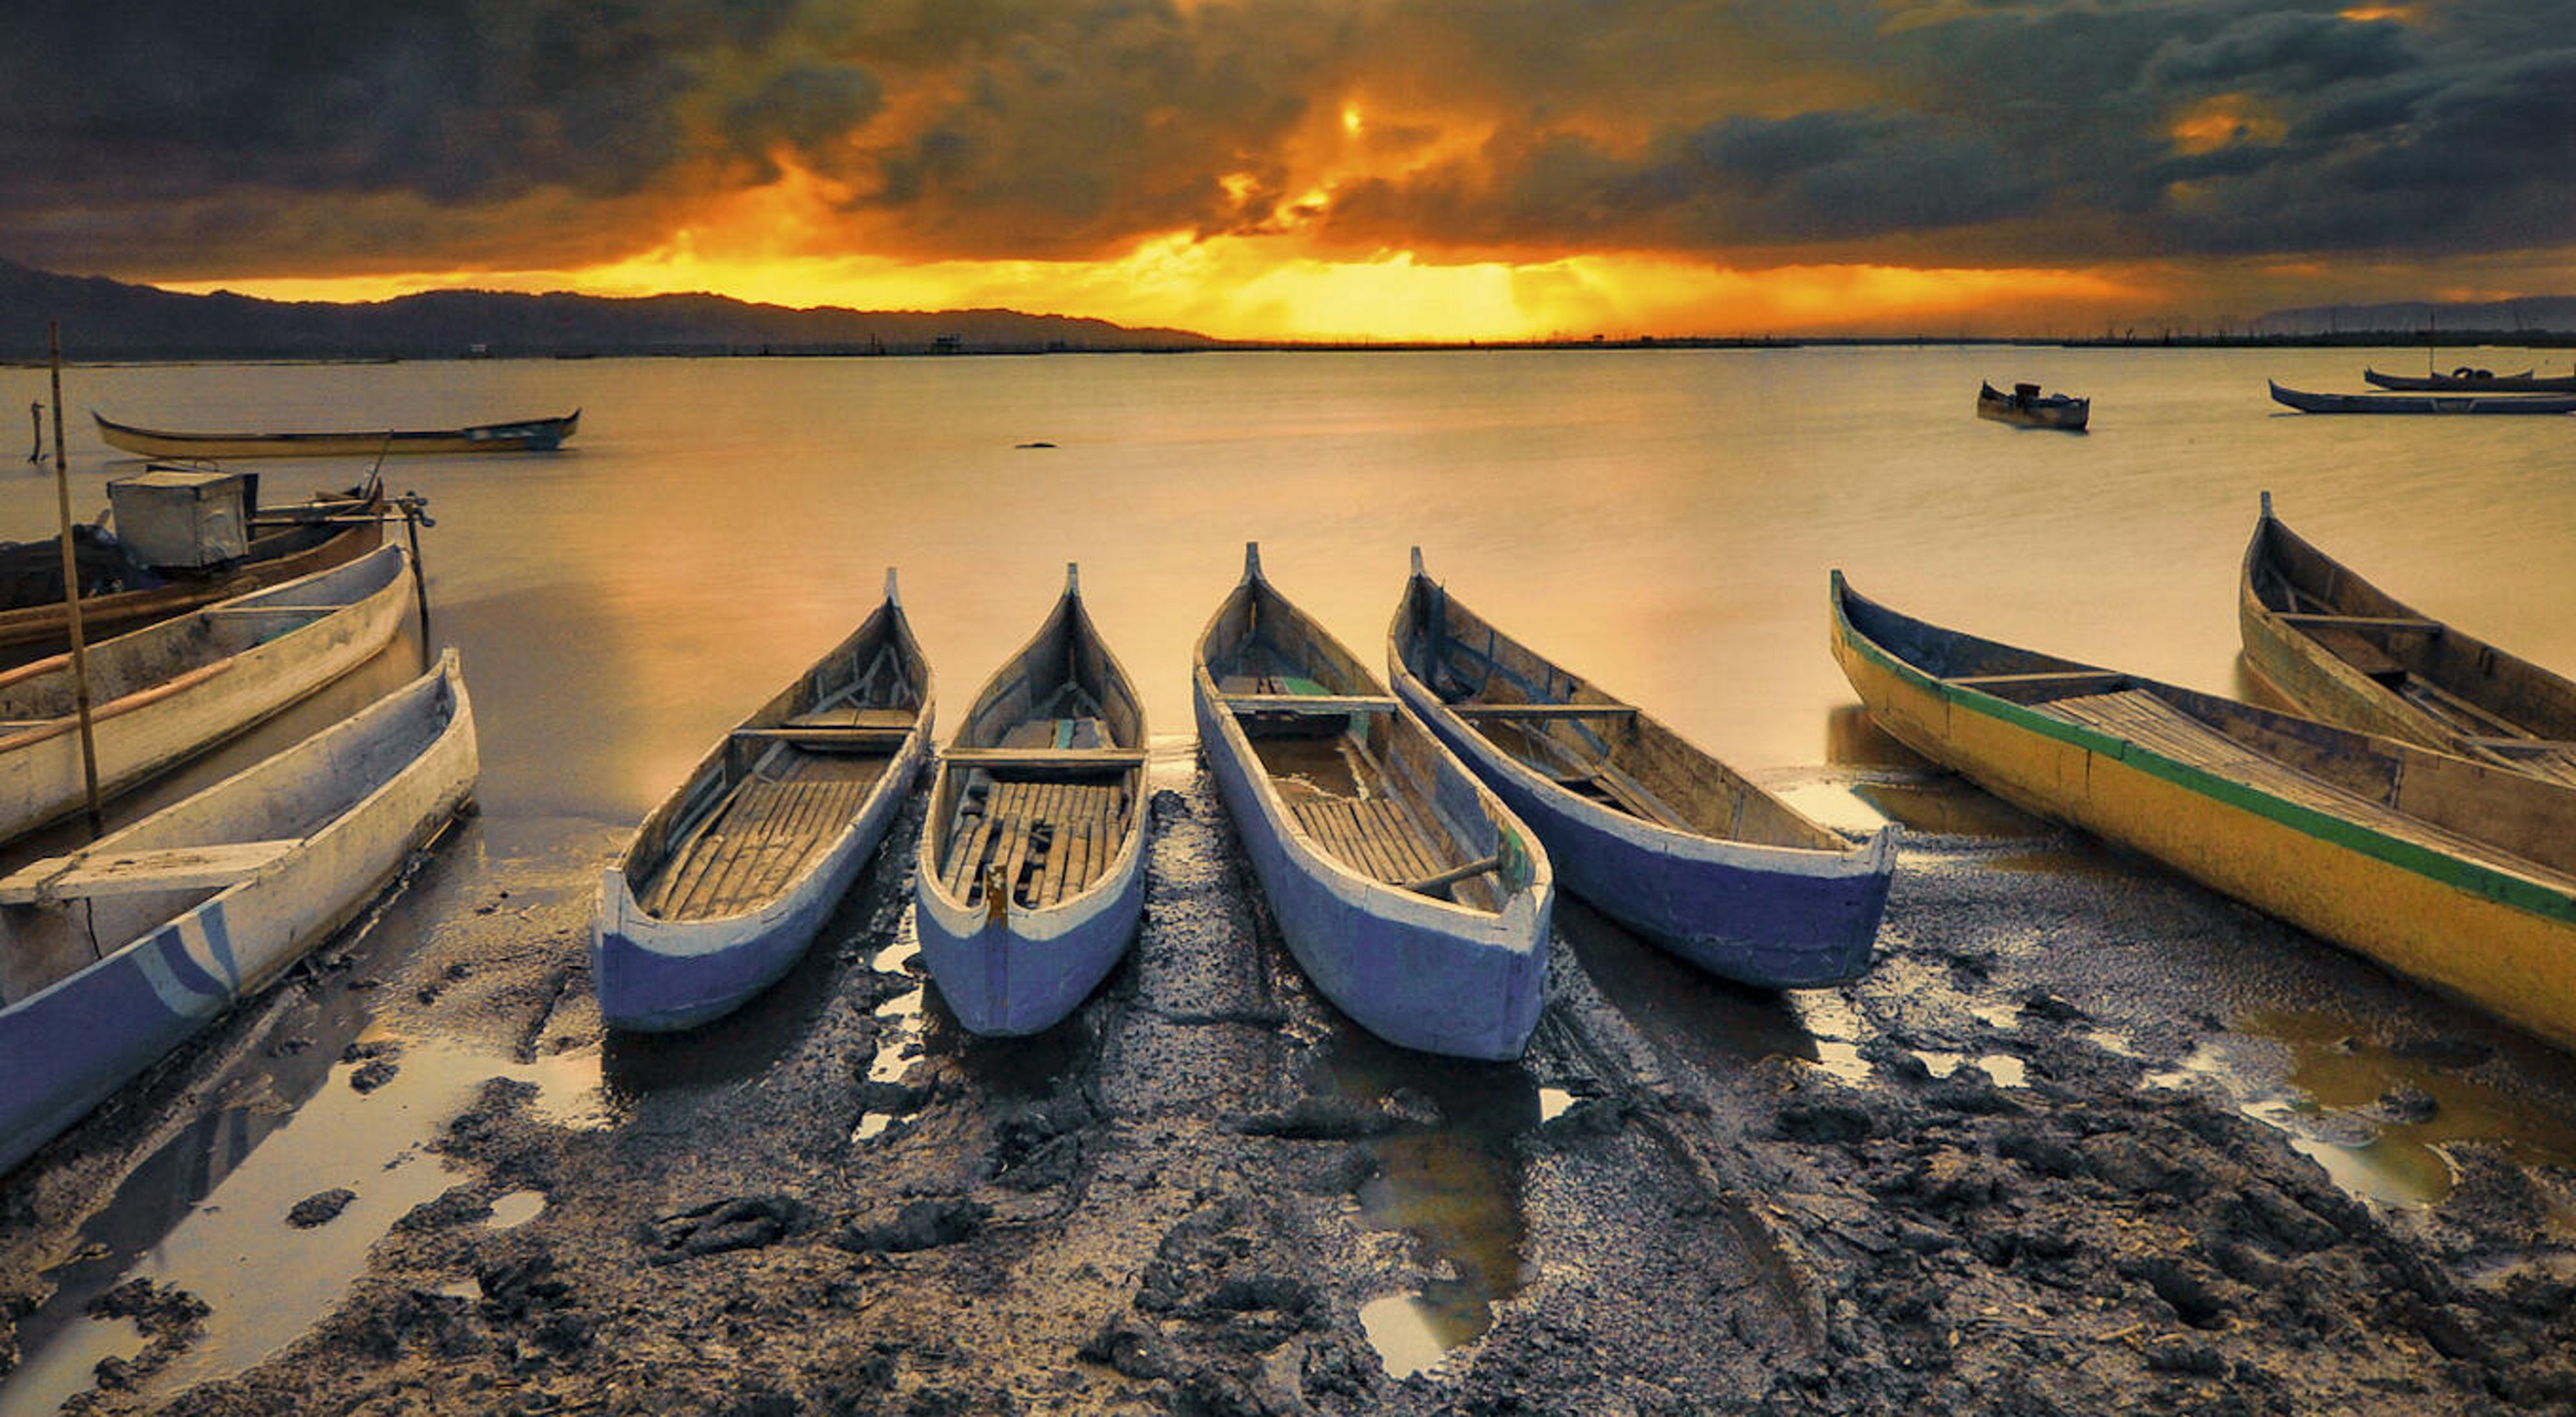 Sunset over a lake with canoes in the foreground.